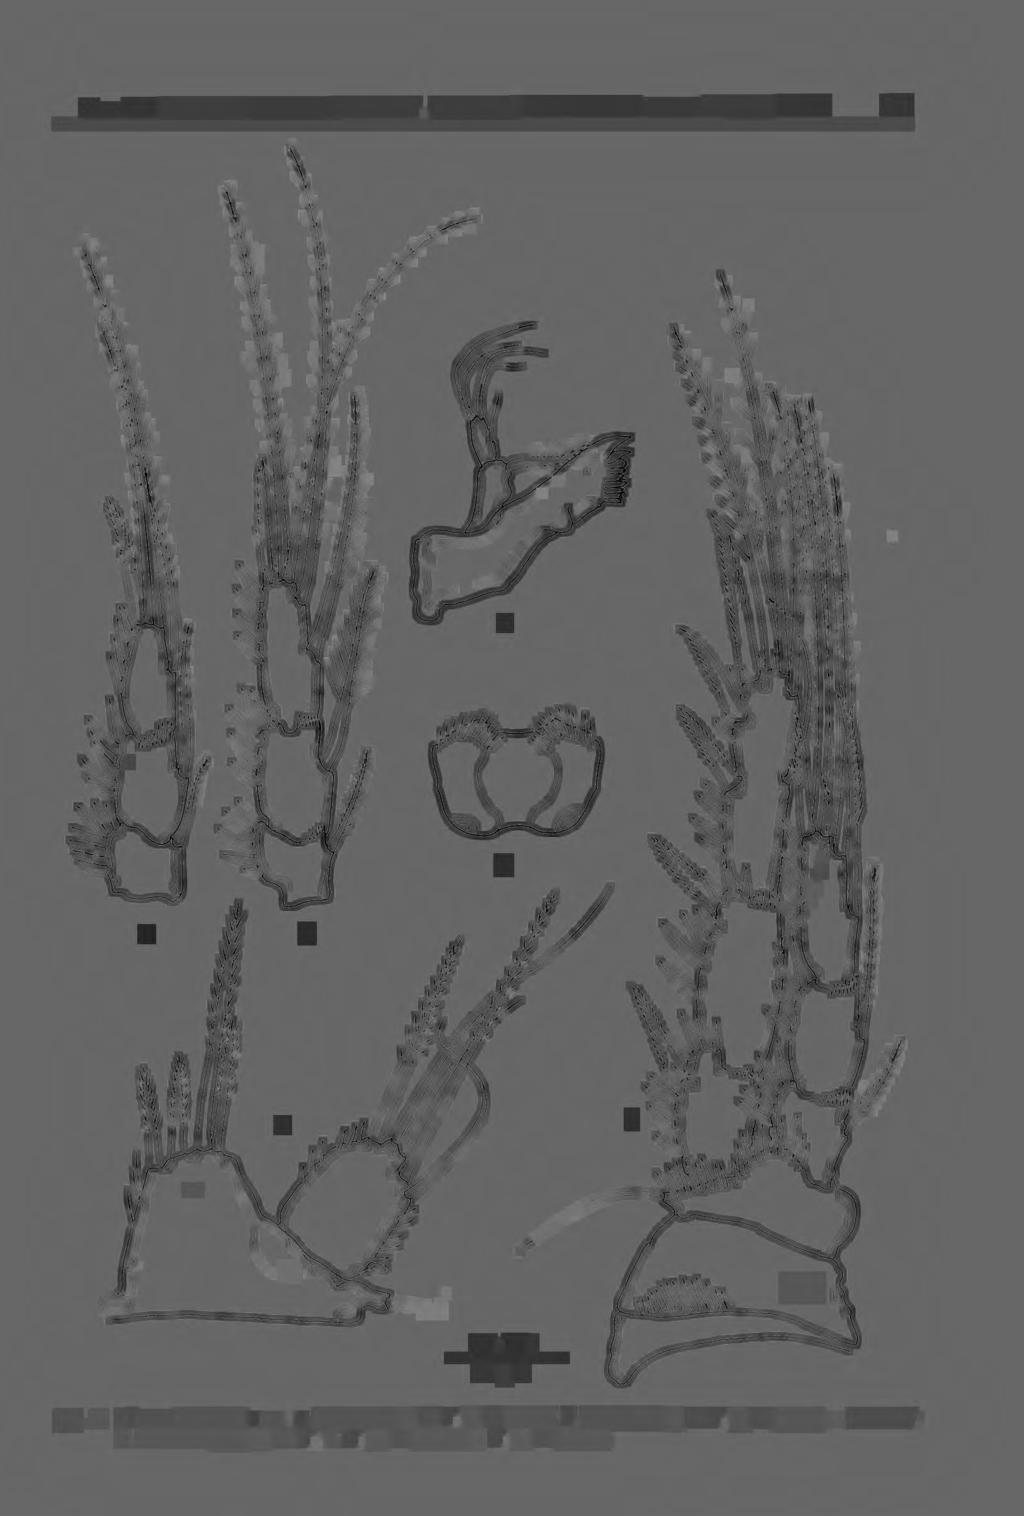 New and interesting copepods (Crustacea, Copepoda) from brackish waters of